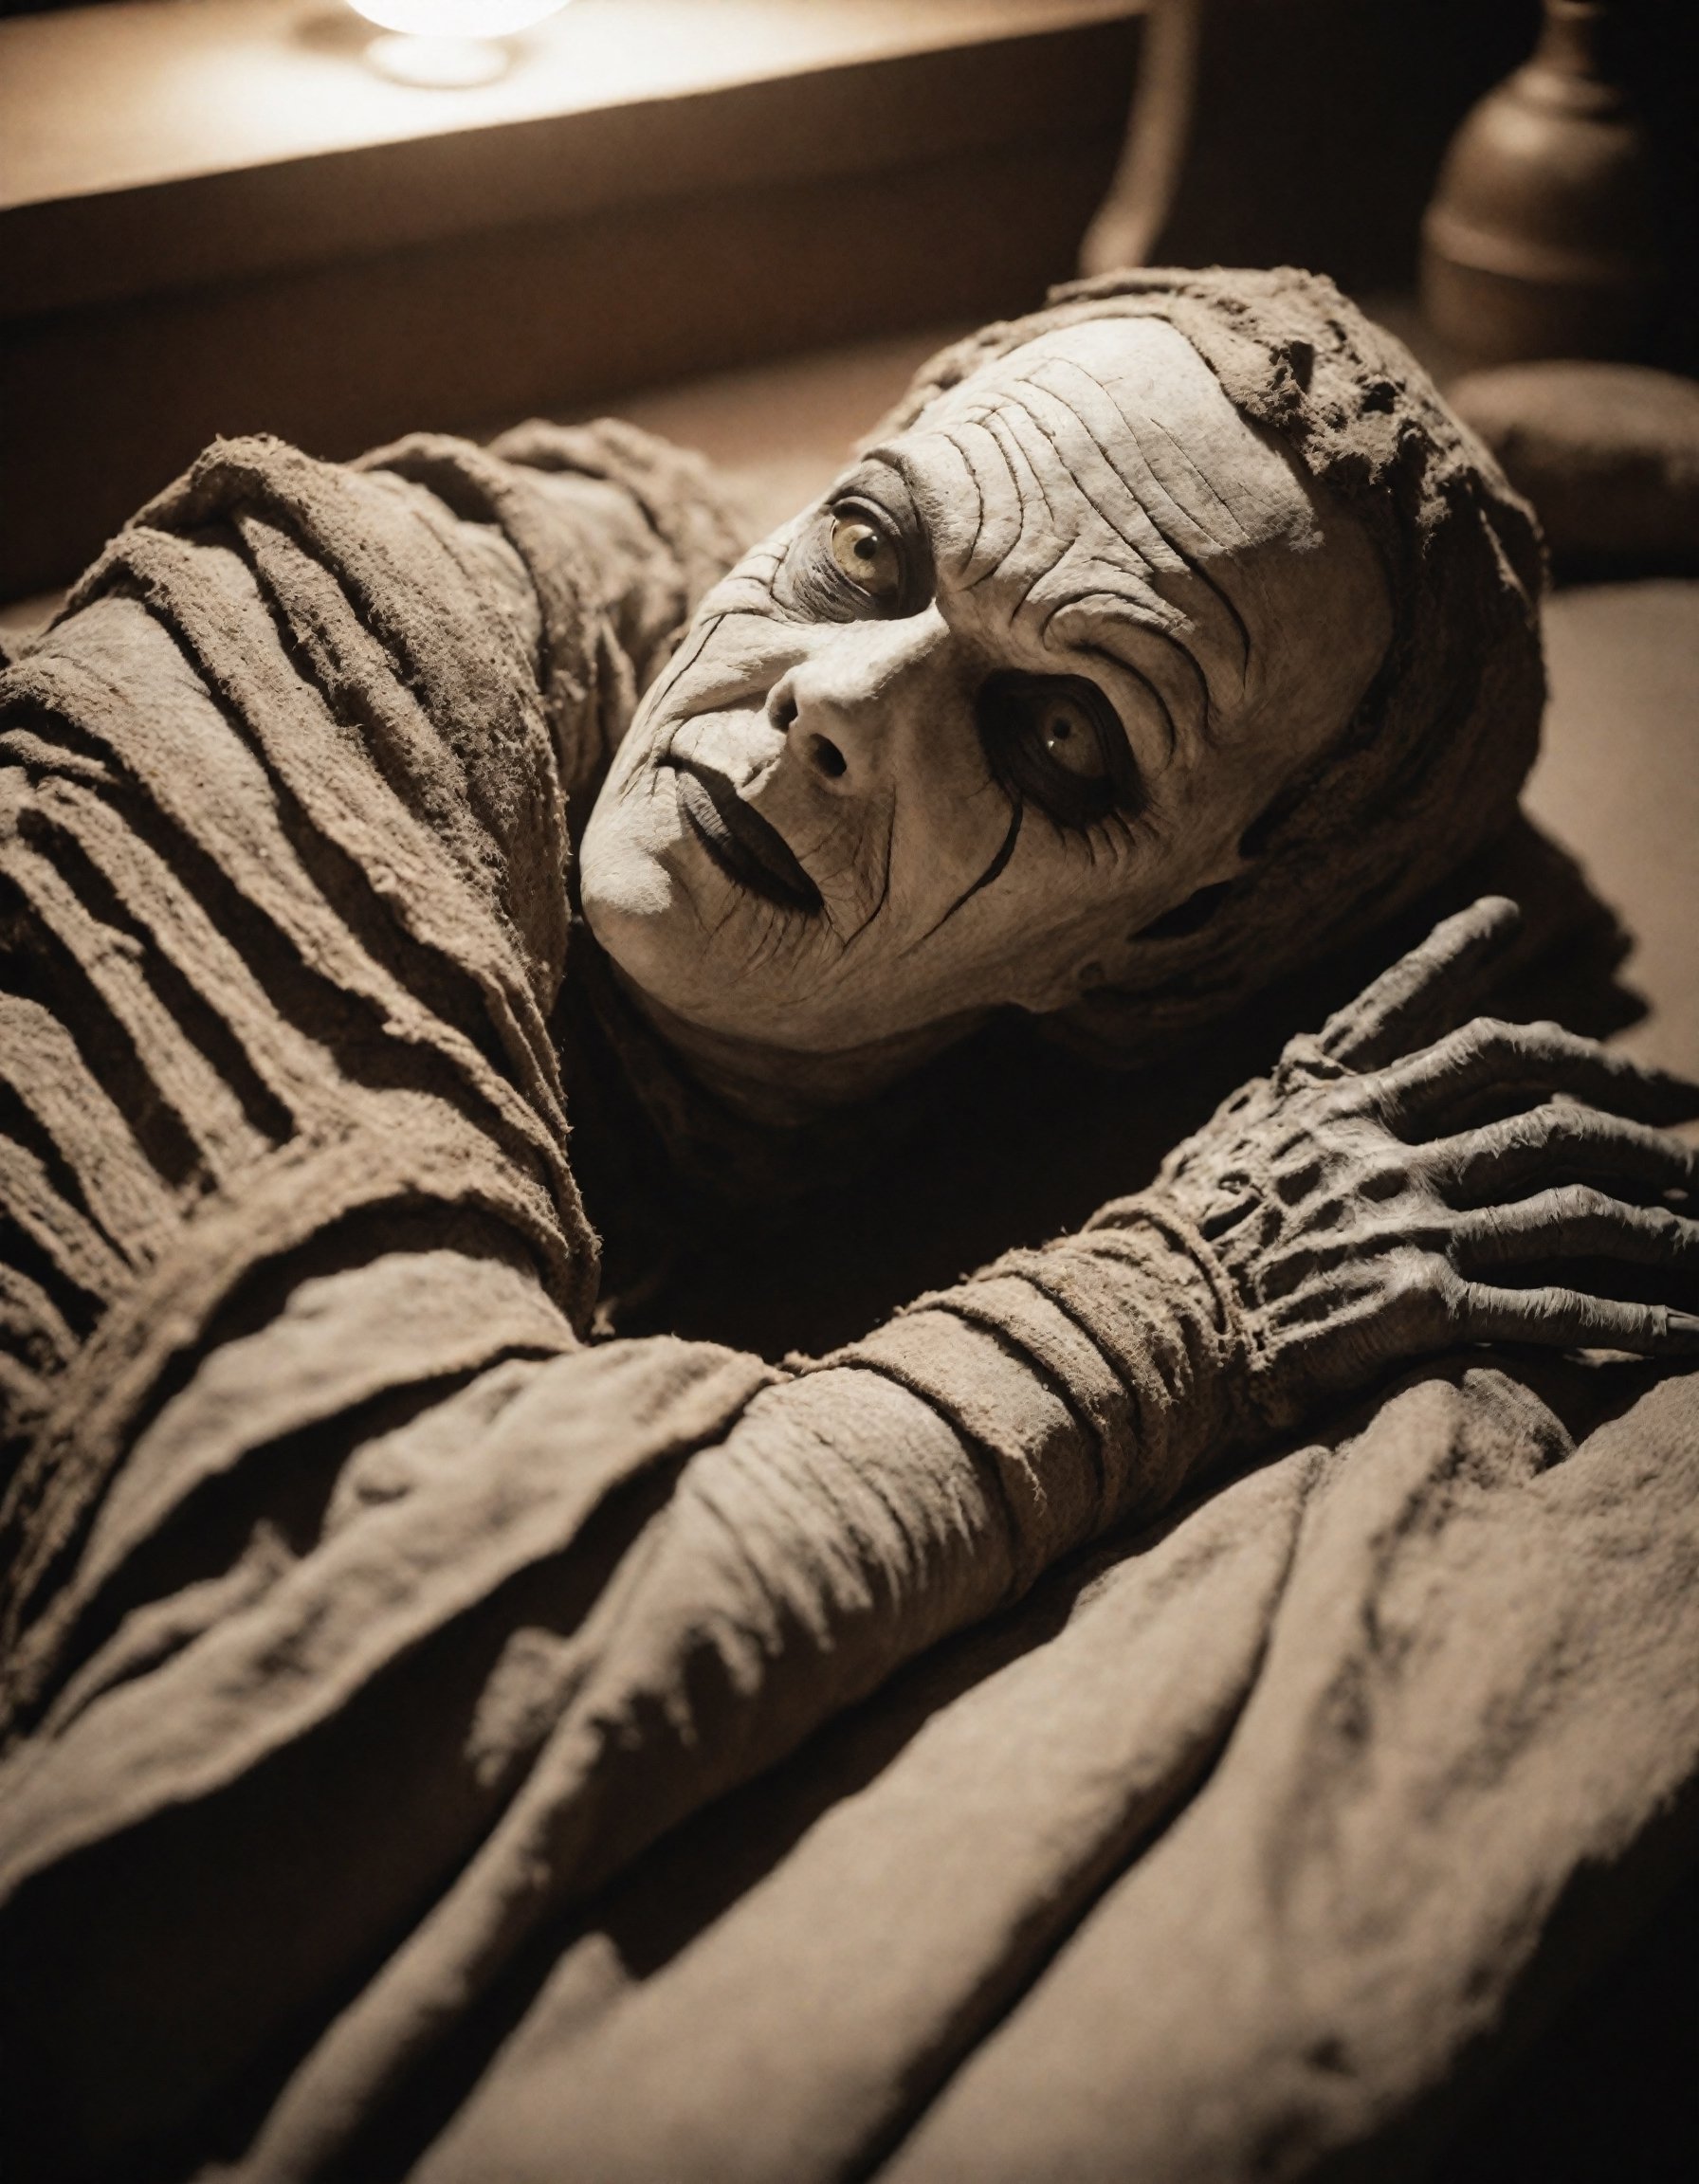 analog film photo of a Pennywise mummy with greyish-green wrinkled skin, with four elongated fingers on each hand and larger, more almond-shaped eyes than a human. It's lying down on a table covered in ancient-looking cloth, with a background showing a dimly lit chamber, hinting at its discovery location. There are various excavation tools laid out beside it. Steampunk, [Art Station, Dribble], close-up, detailed, soft ambient light in the room with a soft focus spotlight on the mummy's face, 4K, Octane render, (sepia tone:1.2) for atmosphere, faded film, desaturated, 35mm photo, grainy, vignette, vintage, Kodachrome, Lomography, stained, highly detailed, found footage